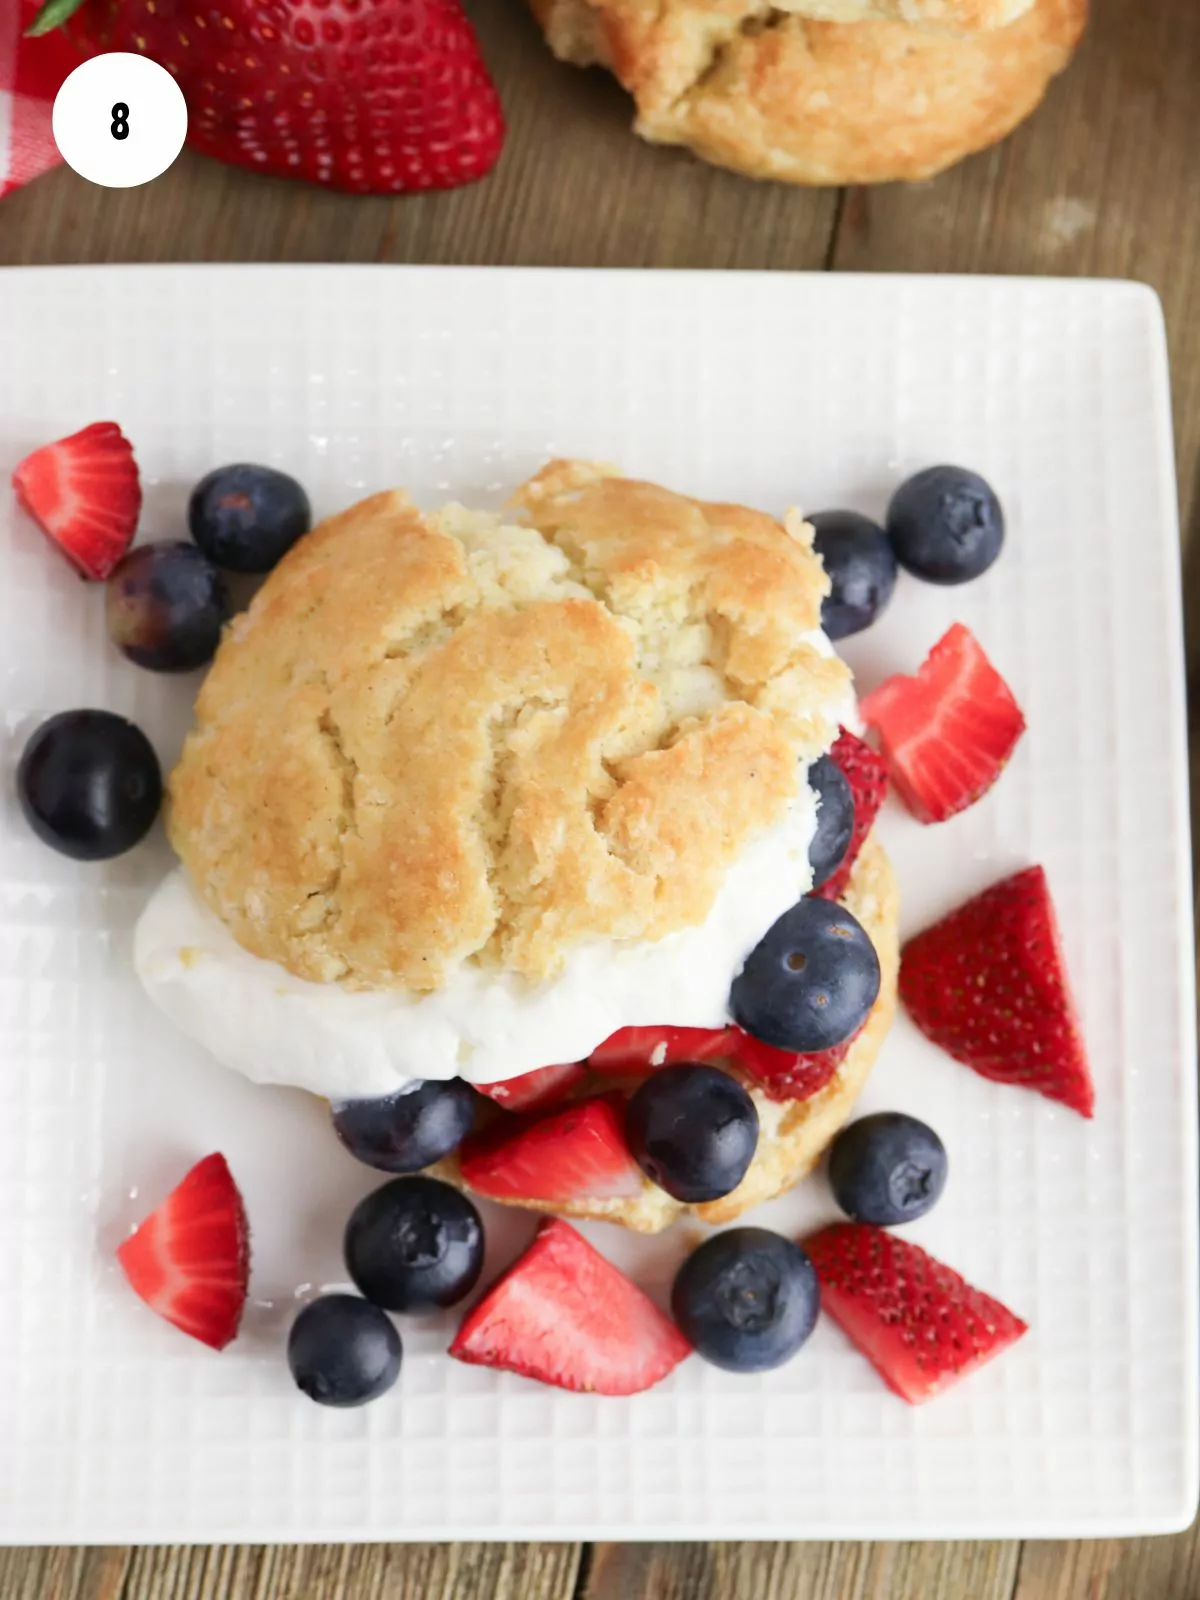 Shortcake cut in half and filled with whipped cream and fresh strawberries and blueberries